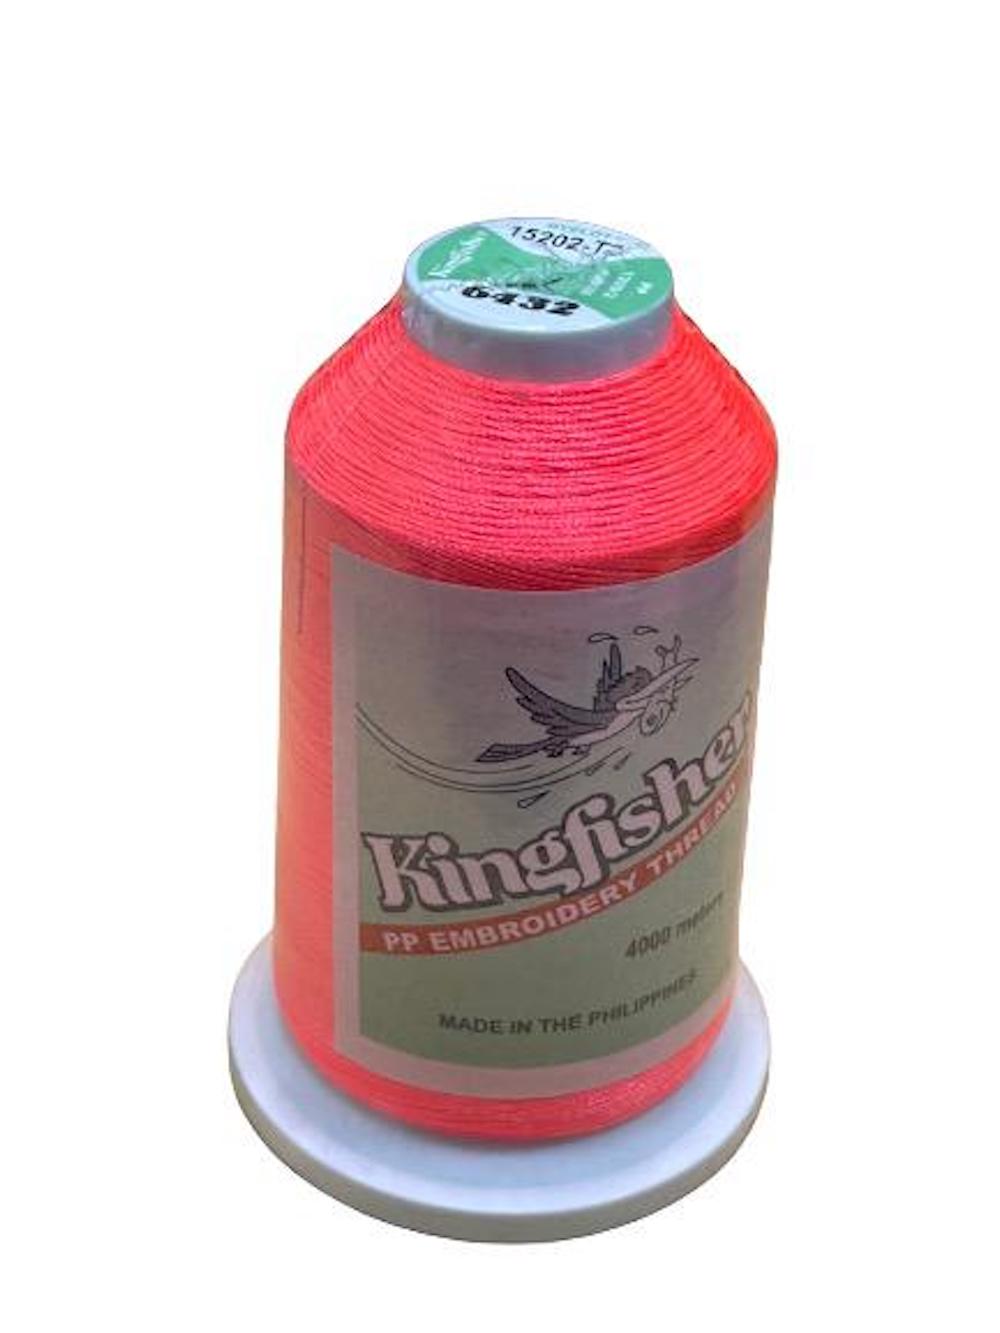 King Fisher Embroidery Thread 4000m 6432 - MY SEWING MALL